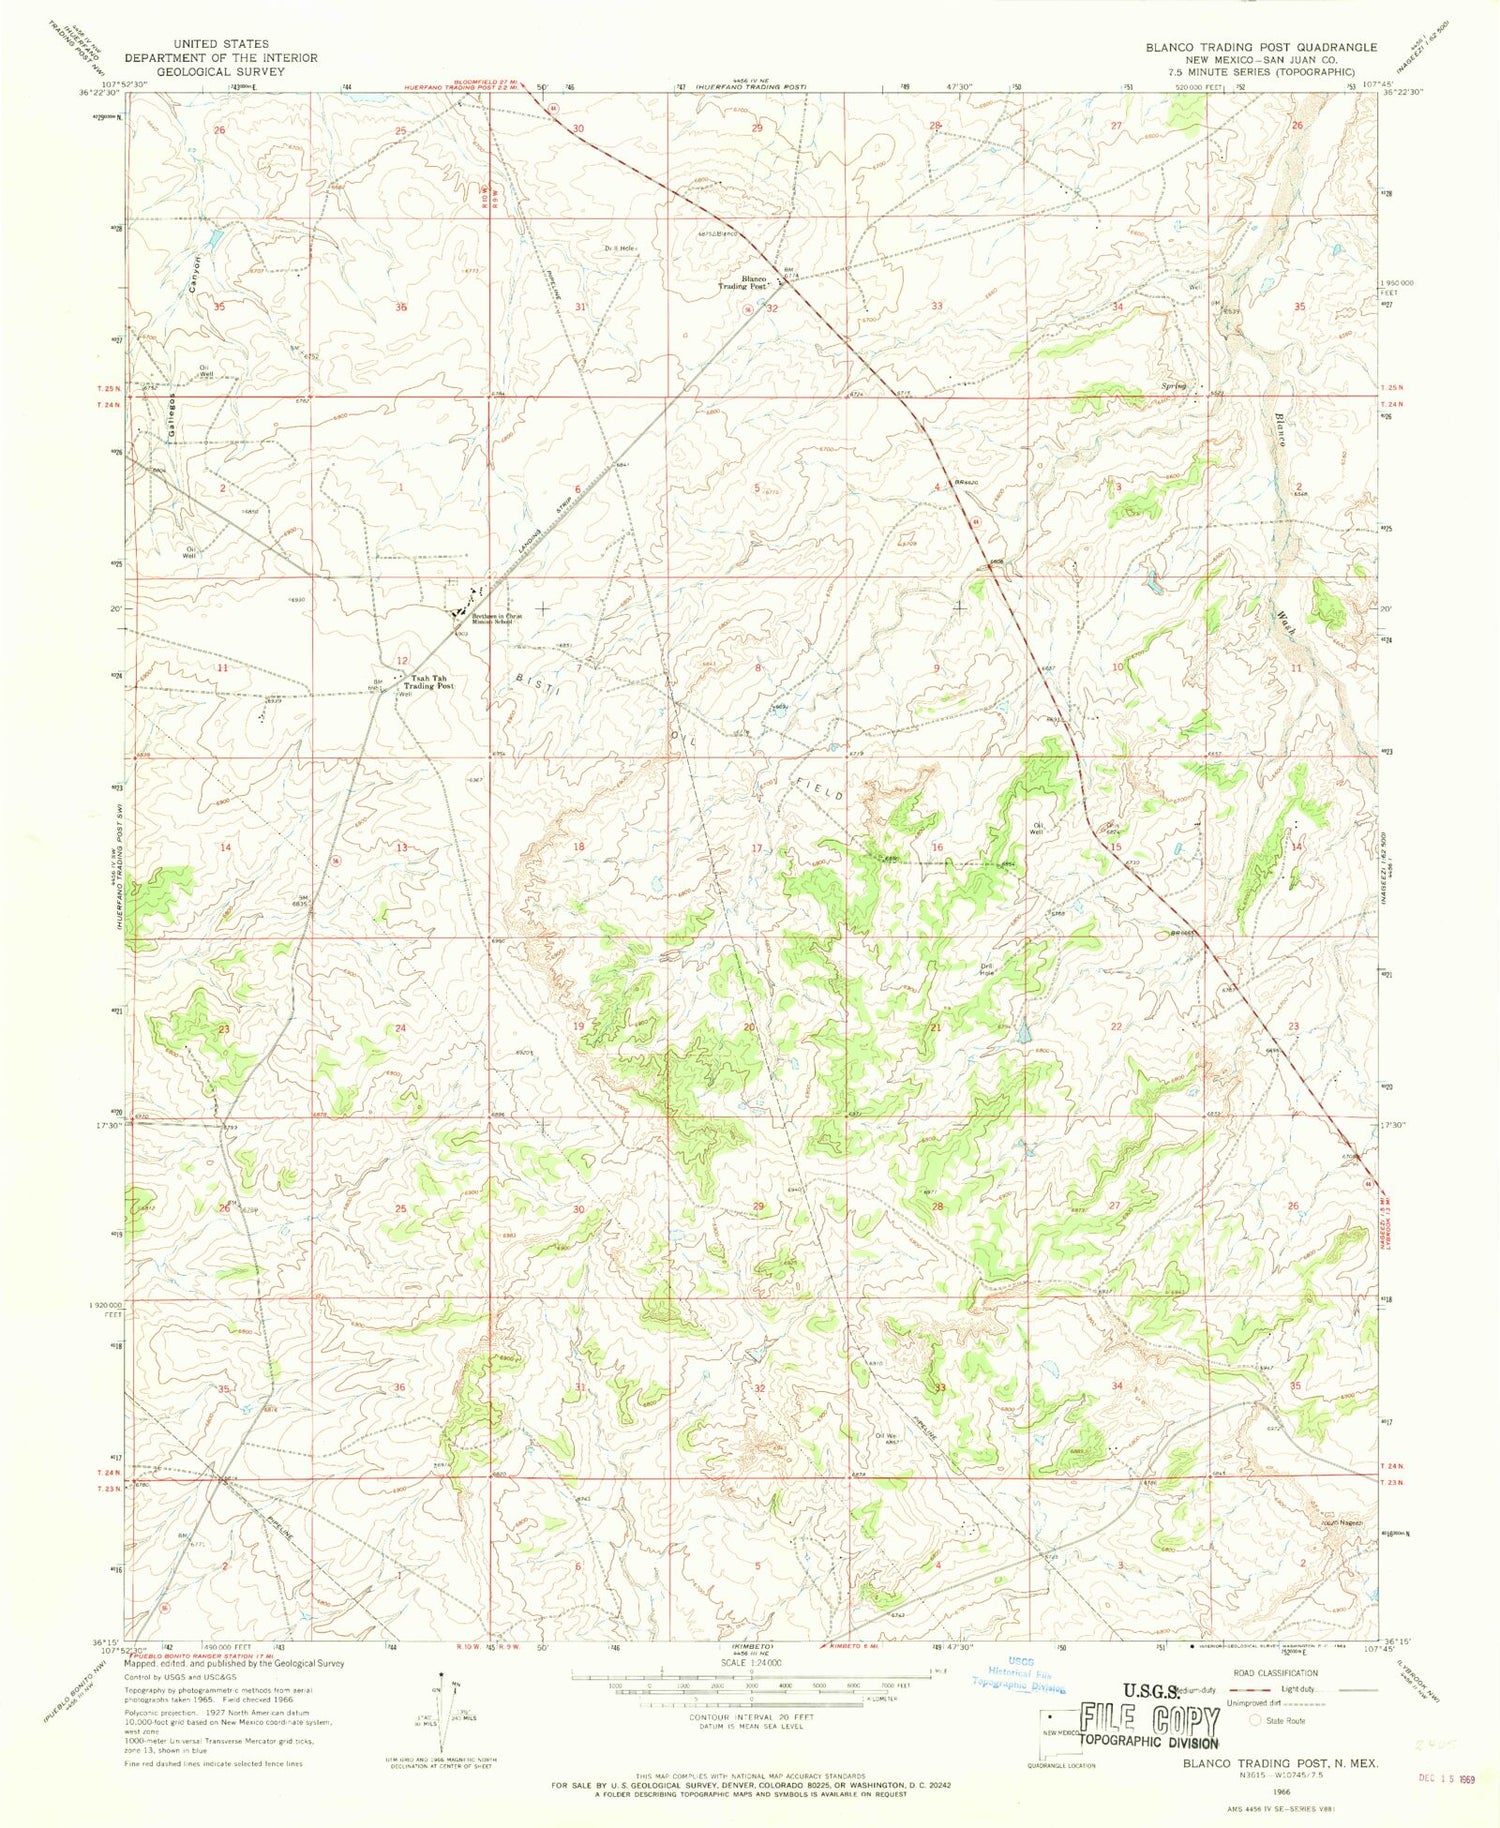 Classic USGS Blanco Trading Post New Mexico 7.5'x7.5' Topo Map Image